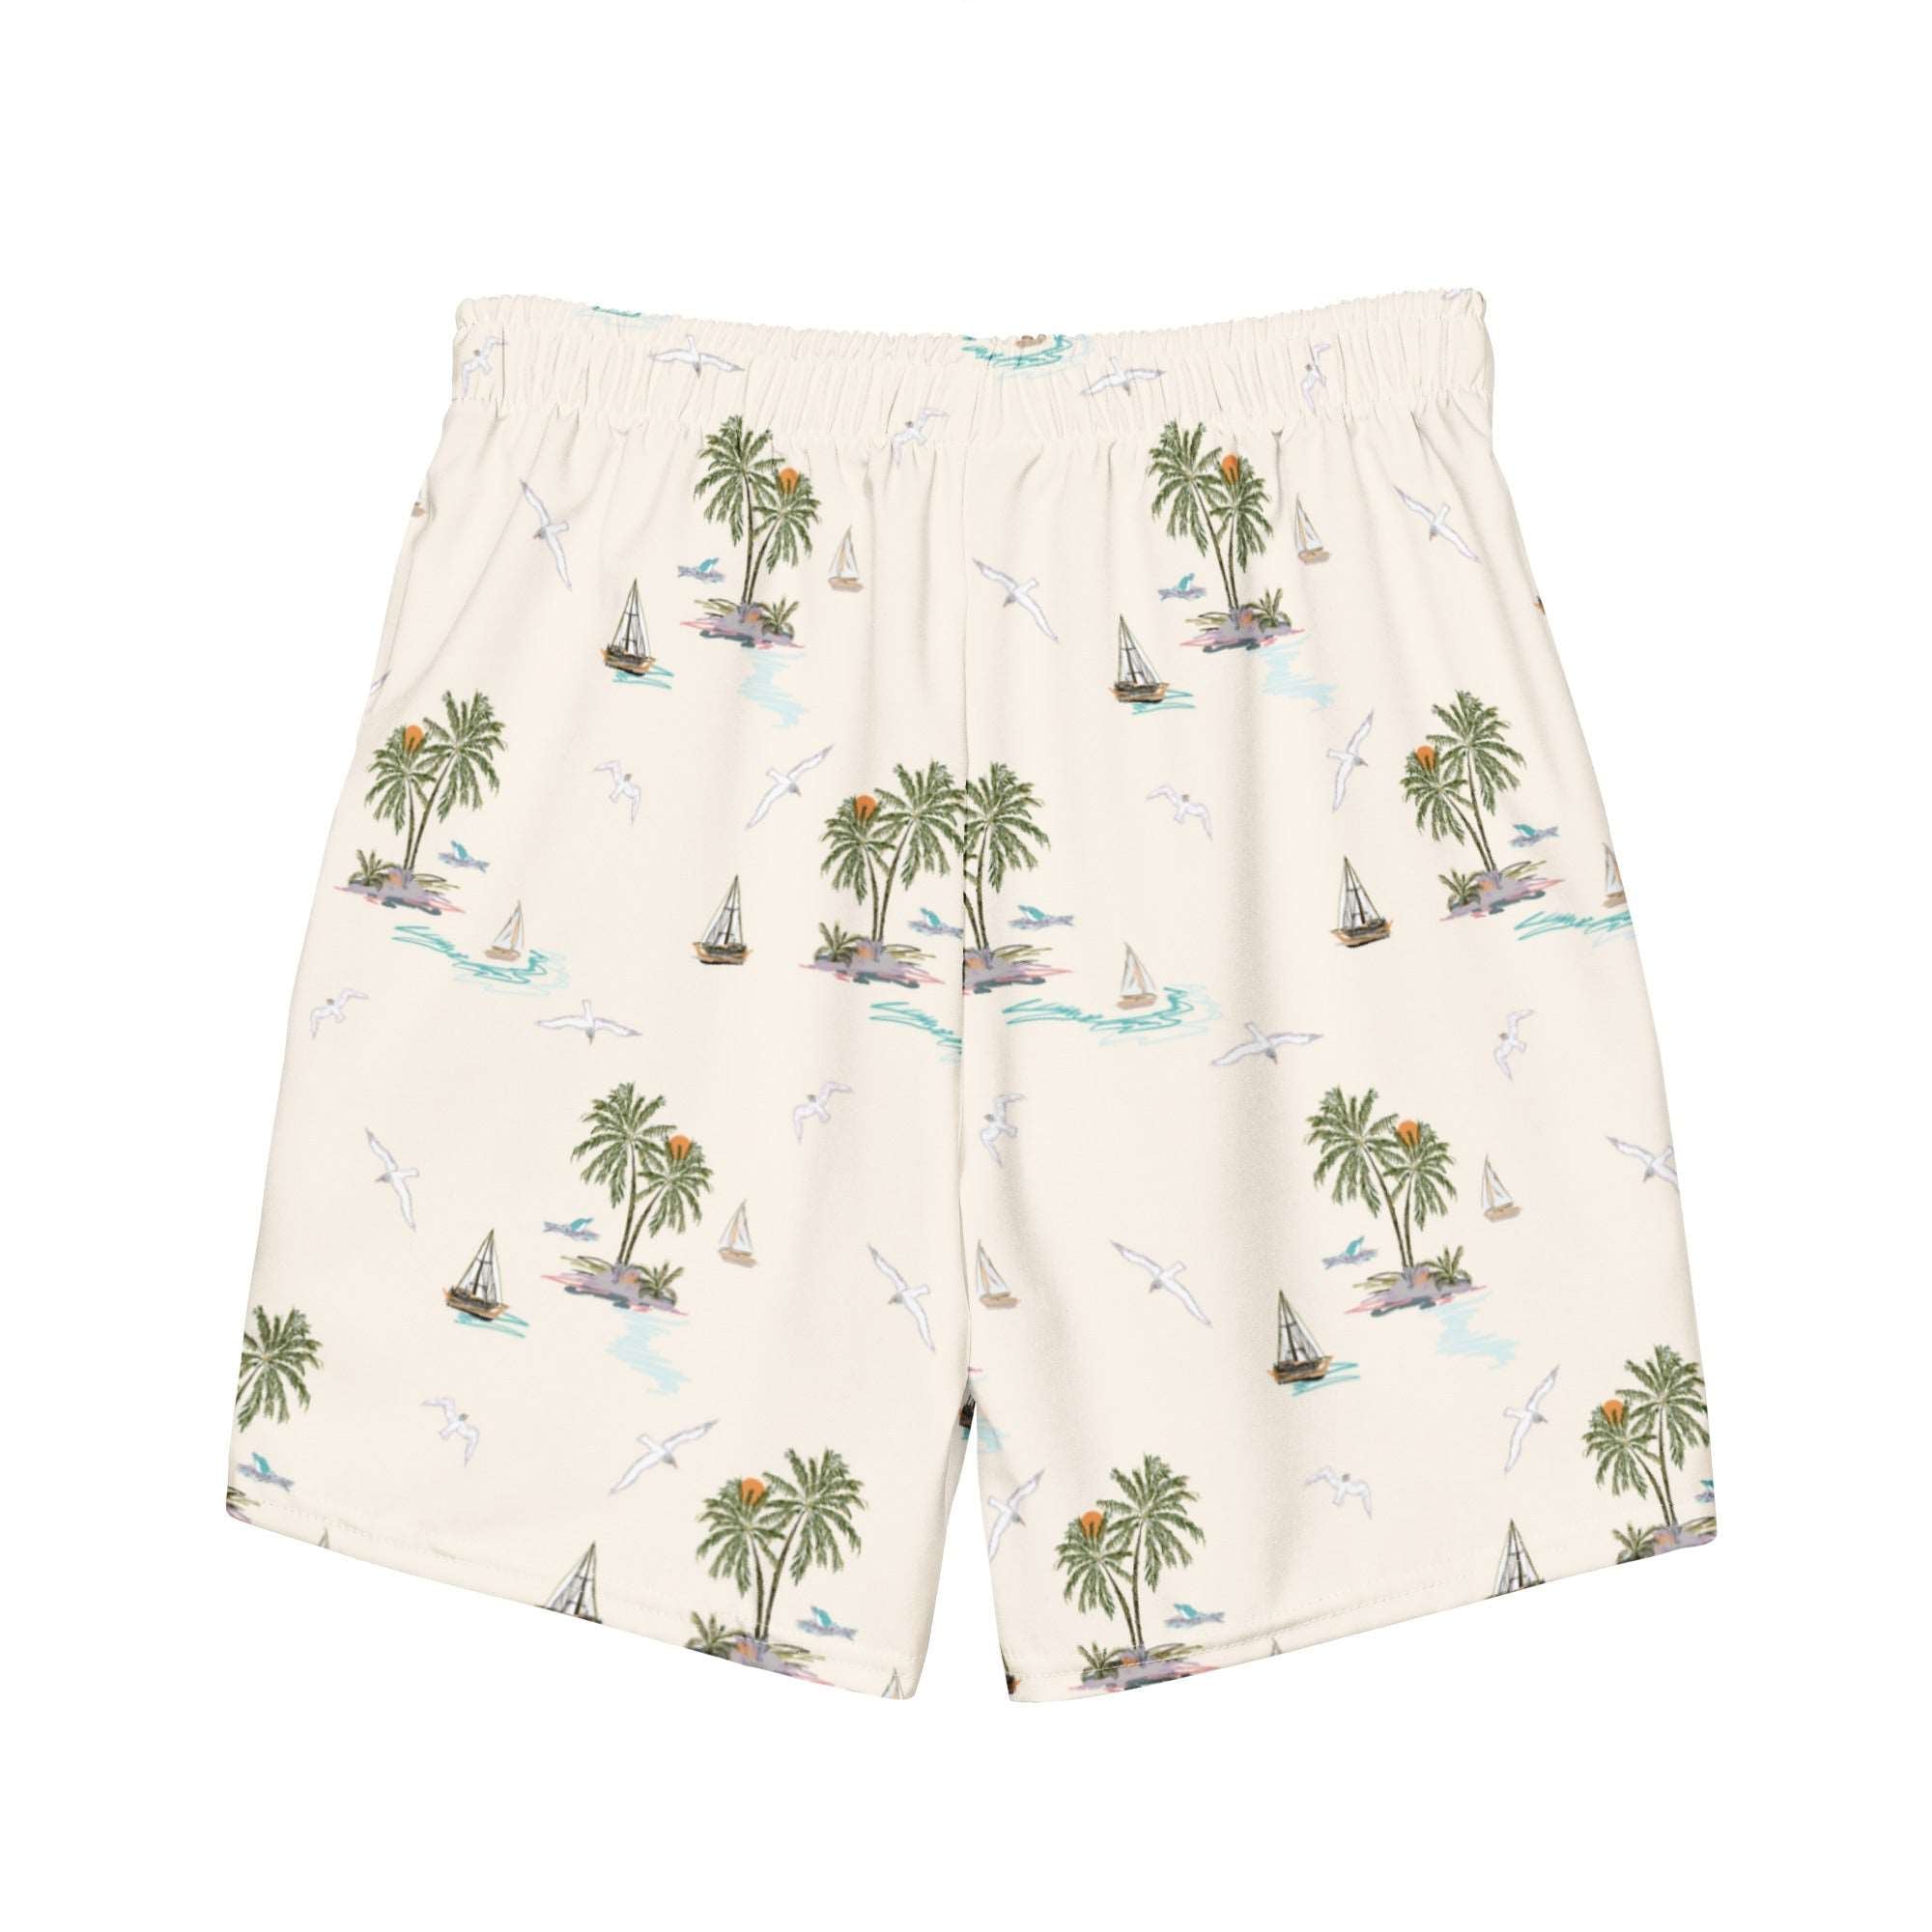 Life at Sea - Eco Pool Short - The Refined Spirit